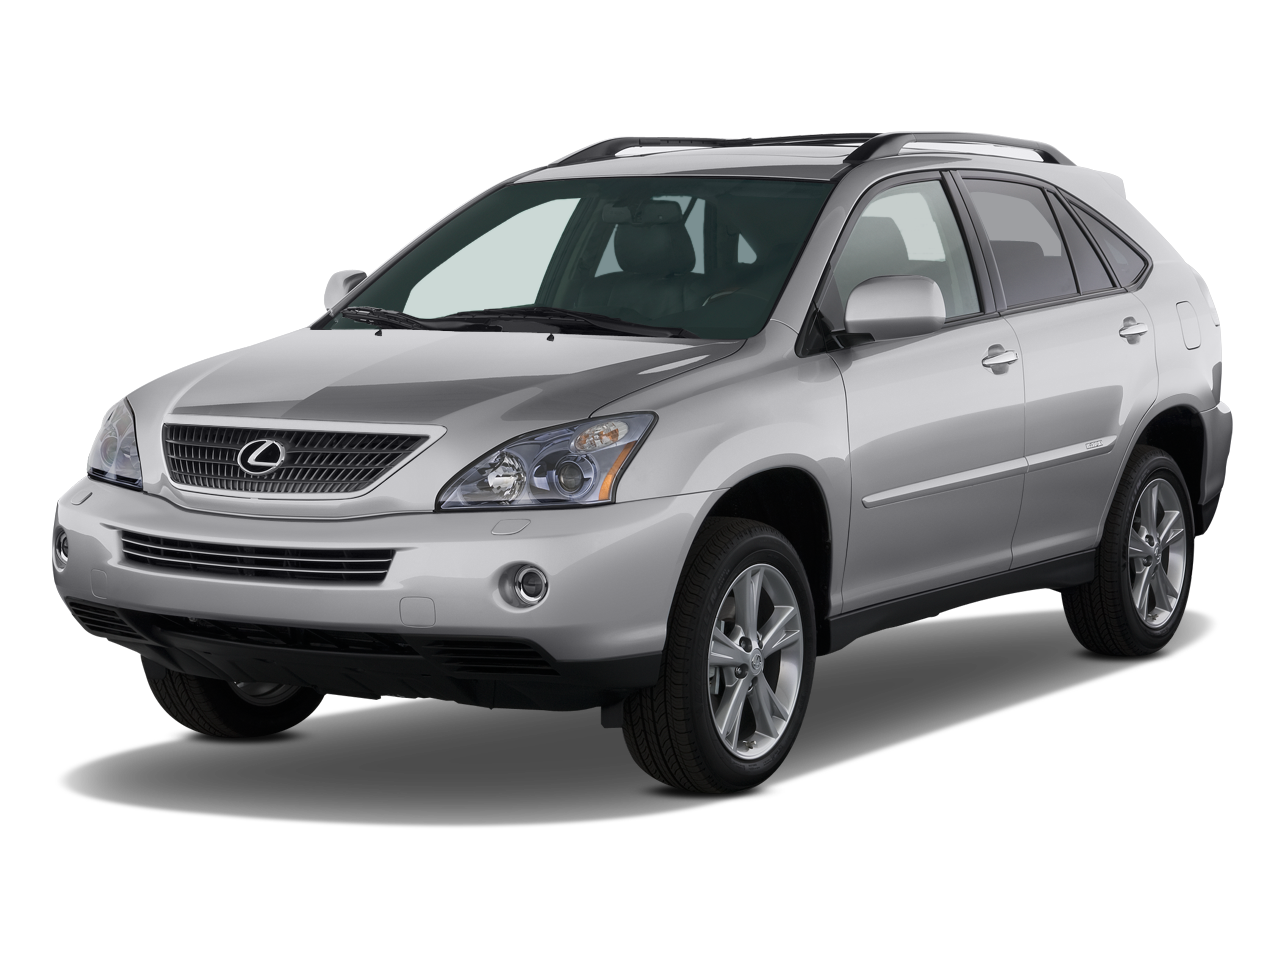 2008 Lexus RX400h Prices, Reviews, and Photos - MotorTrend